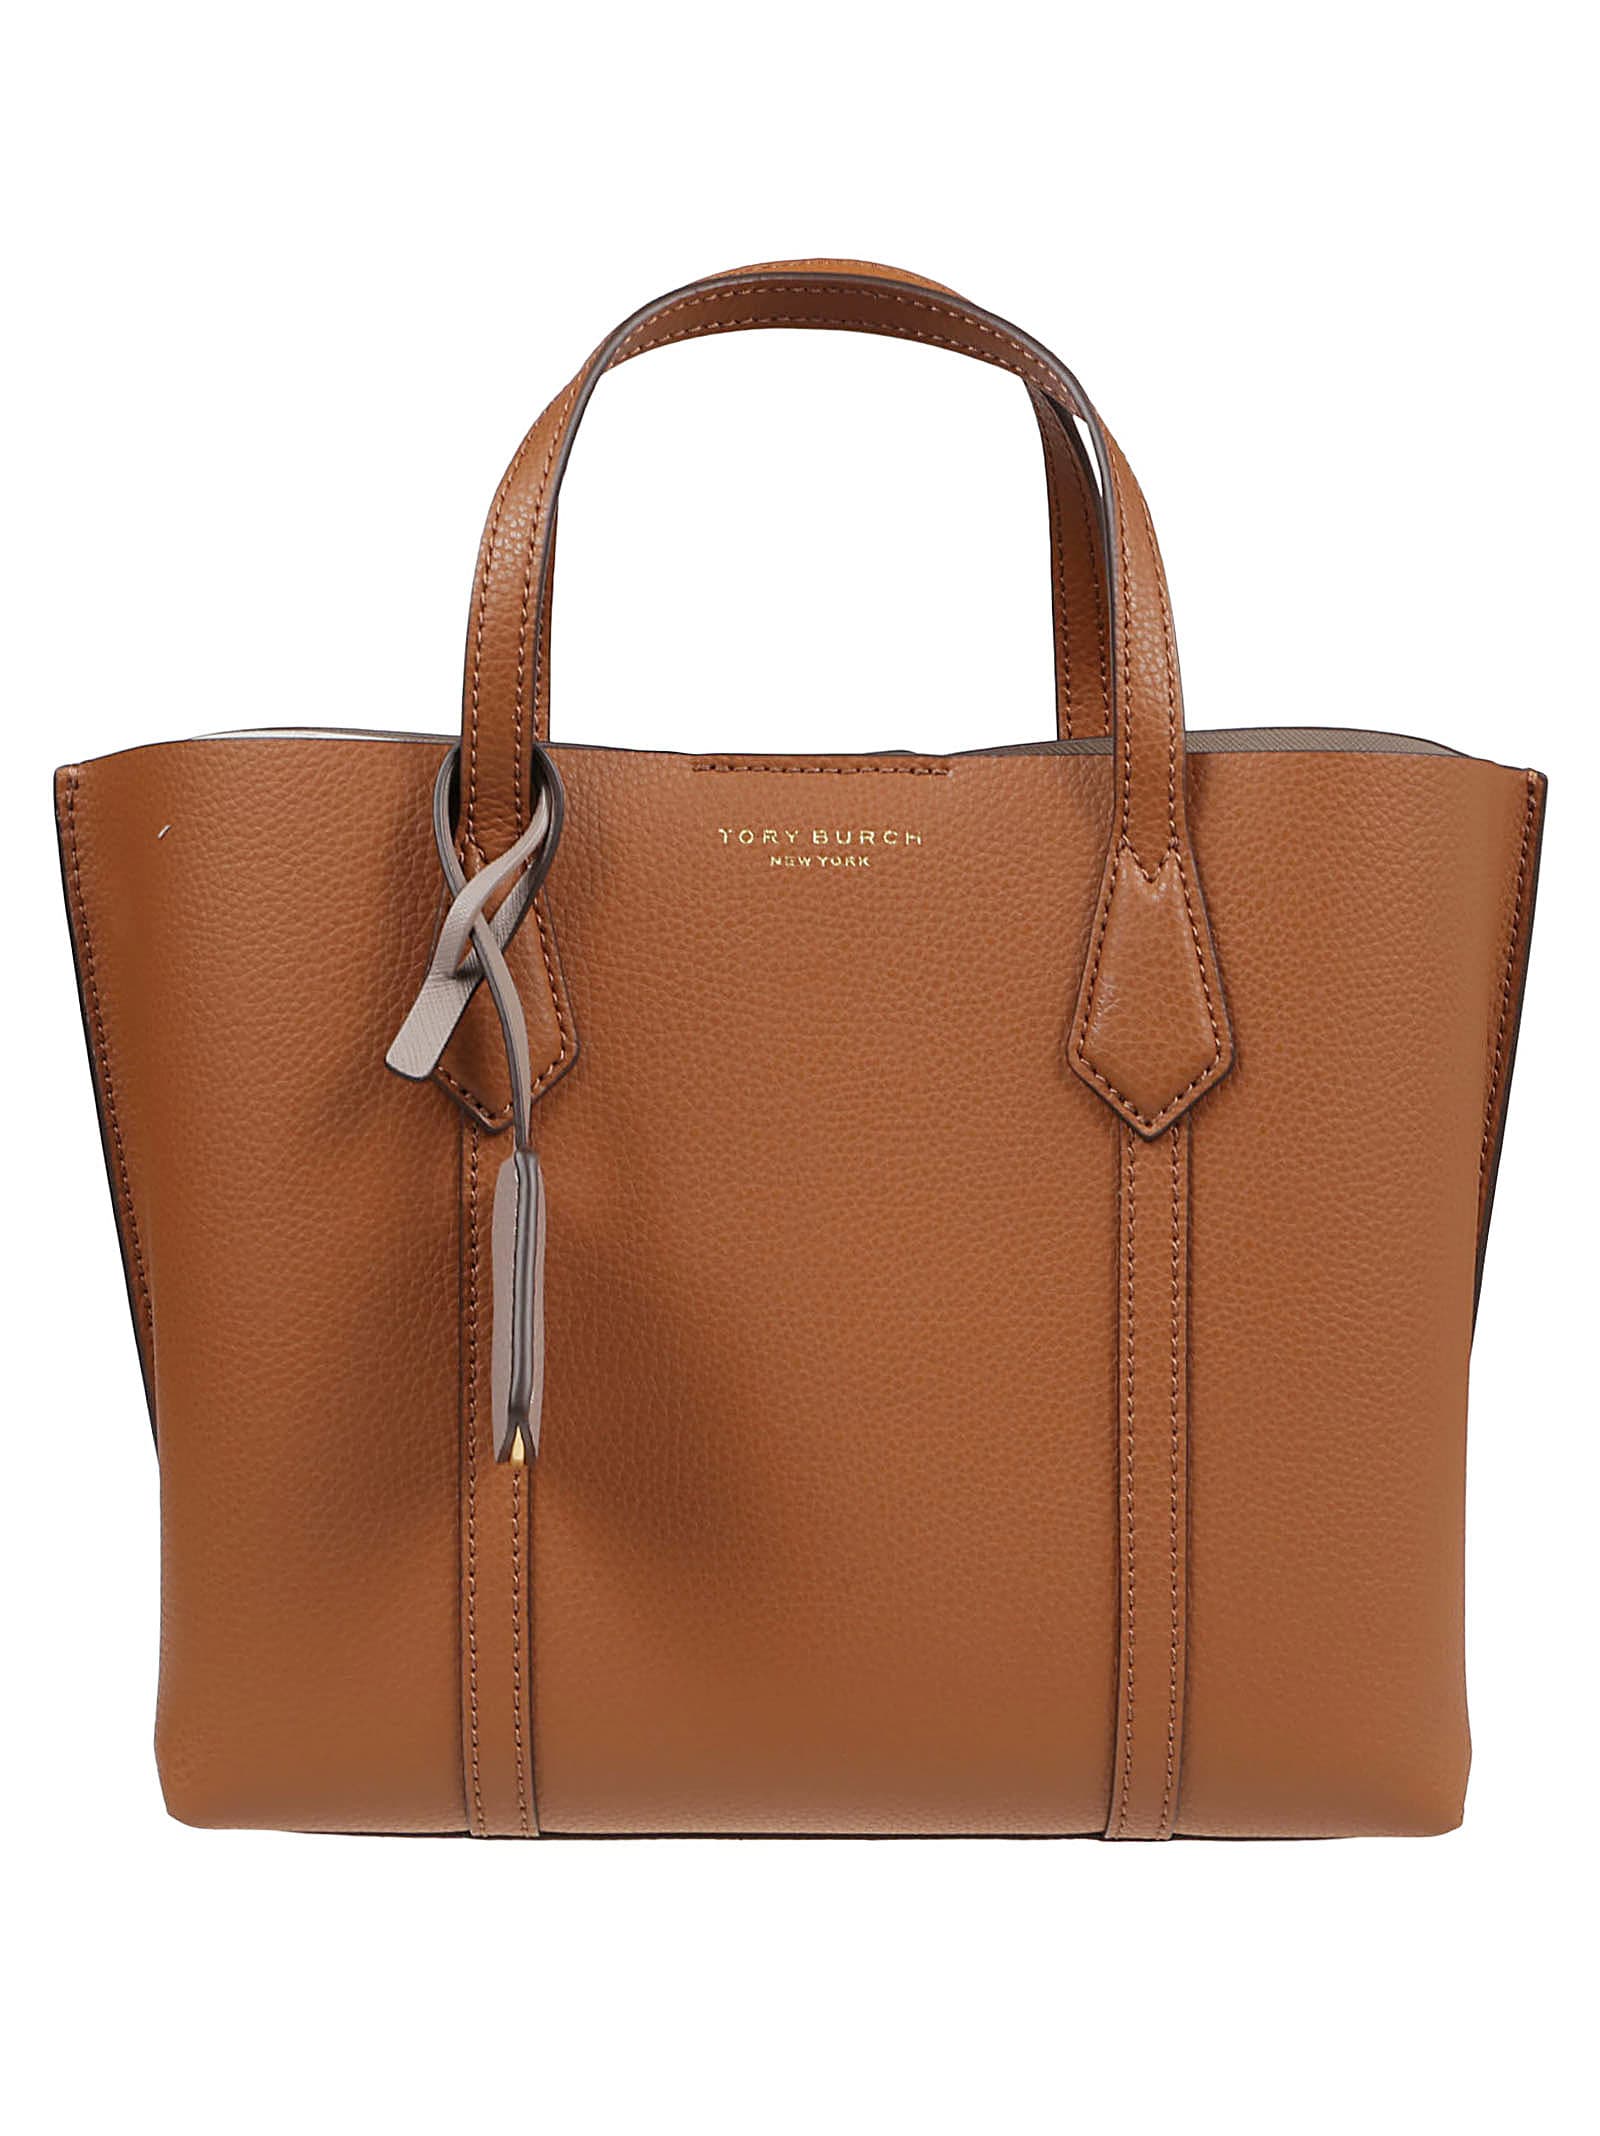 Tory Burch Perry Small Triple-compartment Tote Bag | italist, ALWAYS LIKE A  SALE